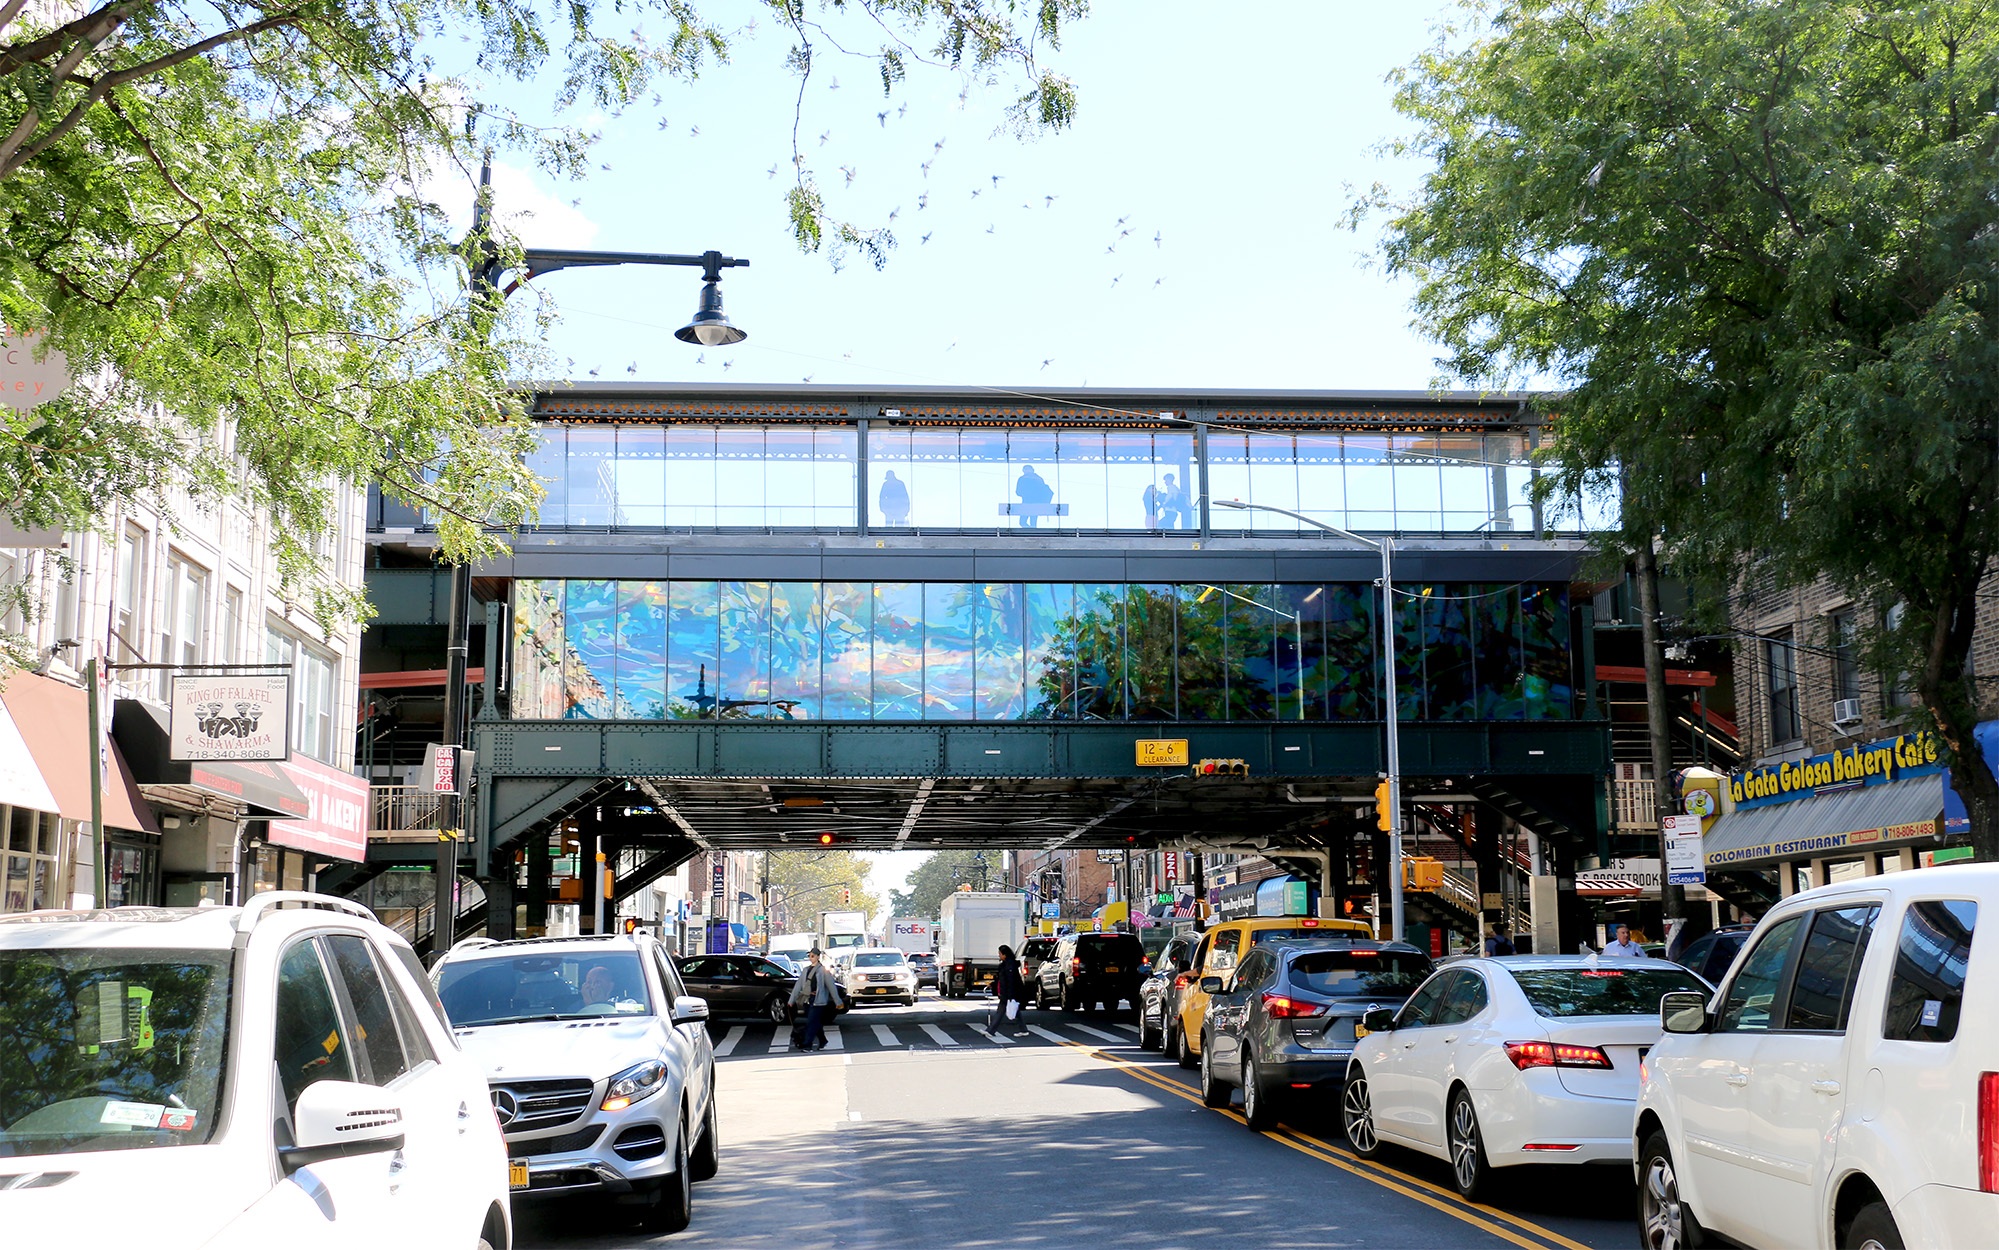 Elevated subway station in Astoria, Queens.